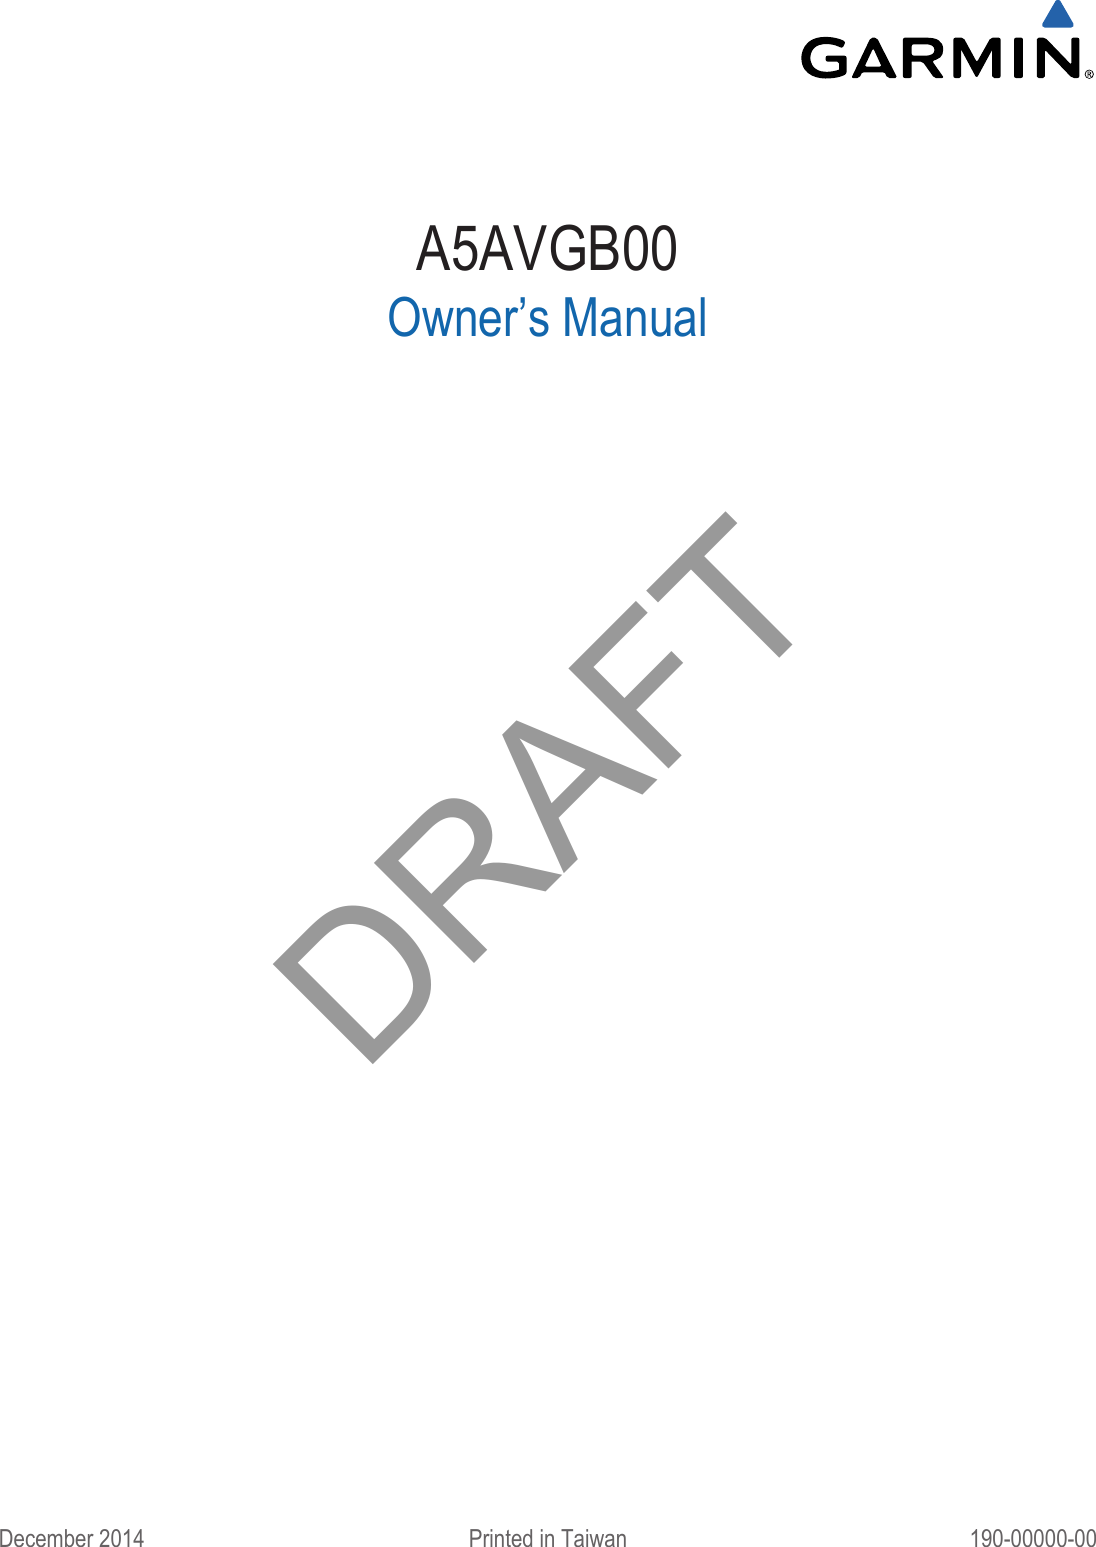 A5AVGB00Owner’s ManualDecember 2014 Printed in Taiwan 190-00000-00DRAFT